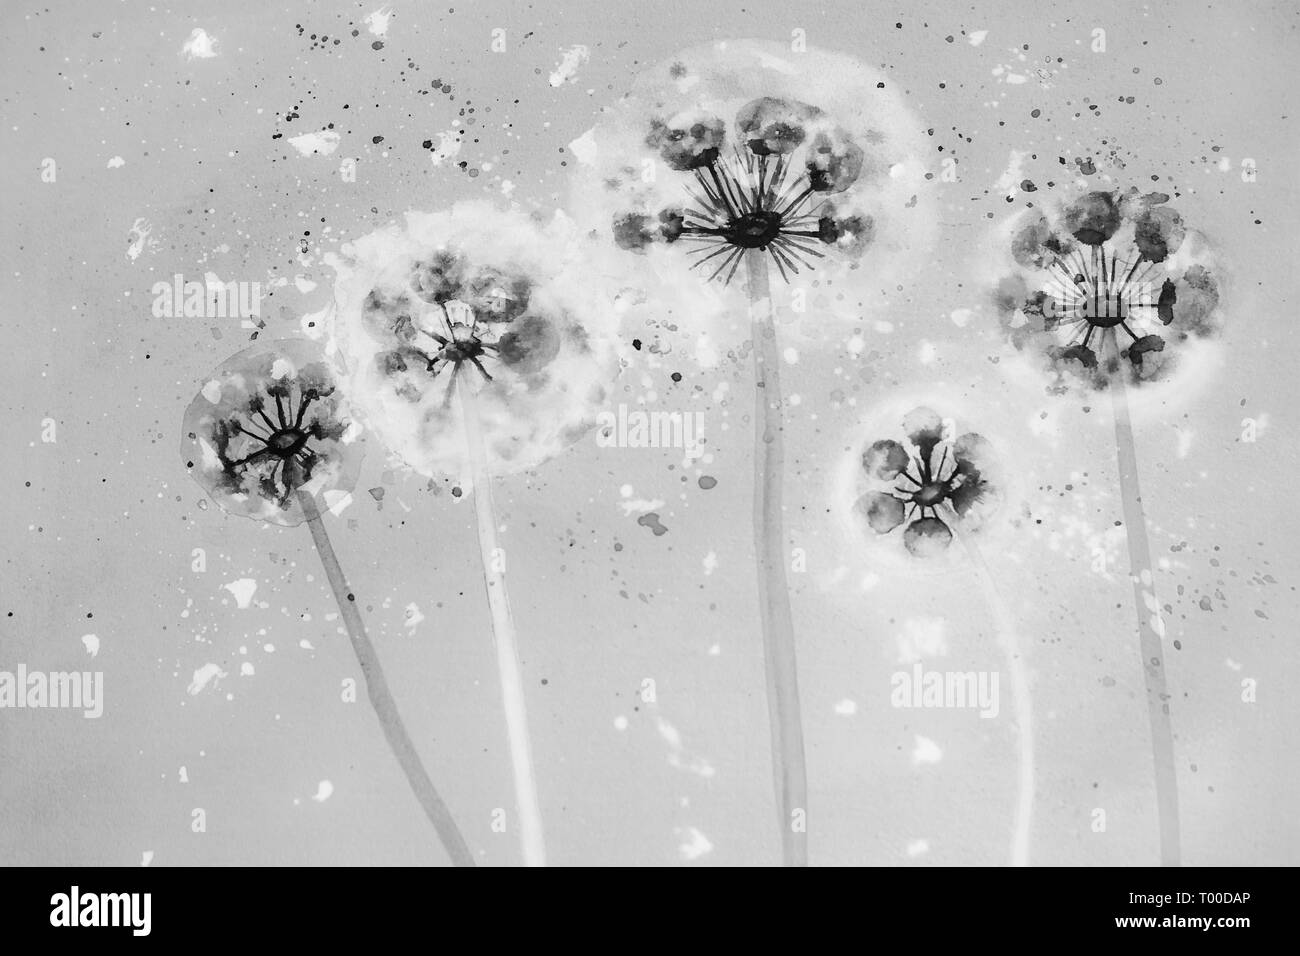 Watercolor flowers in difWatercolor round flowers against the sky. Black and white illustration Stock Photo